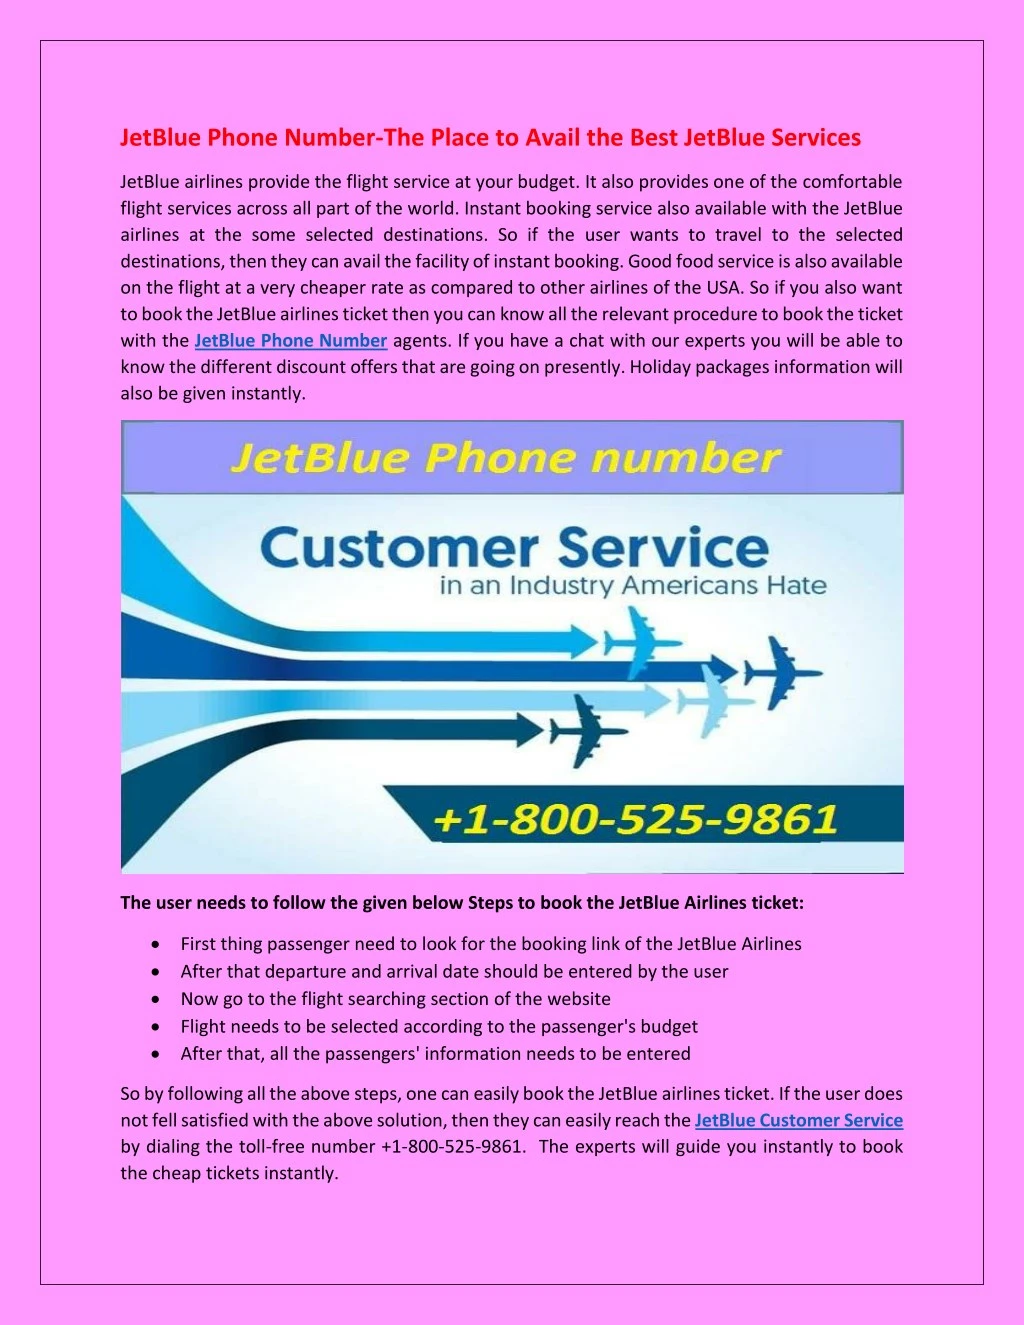 jetblue phone number the place to avail the best